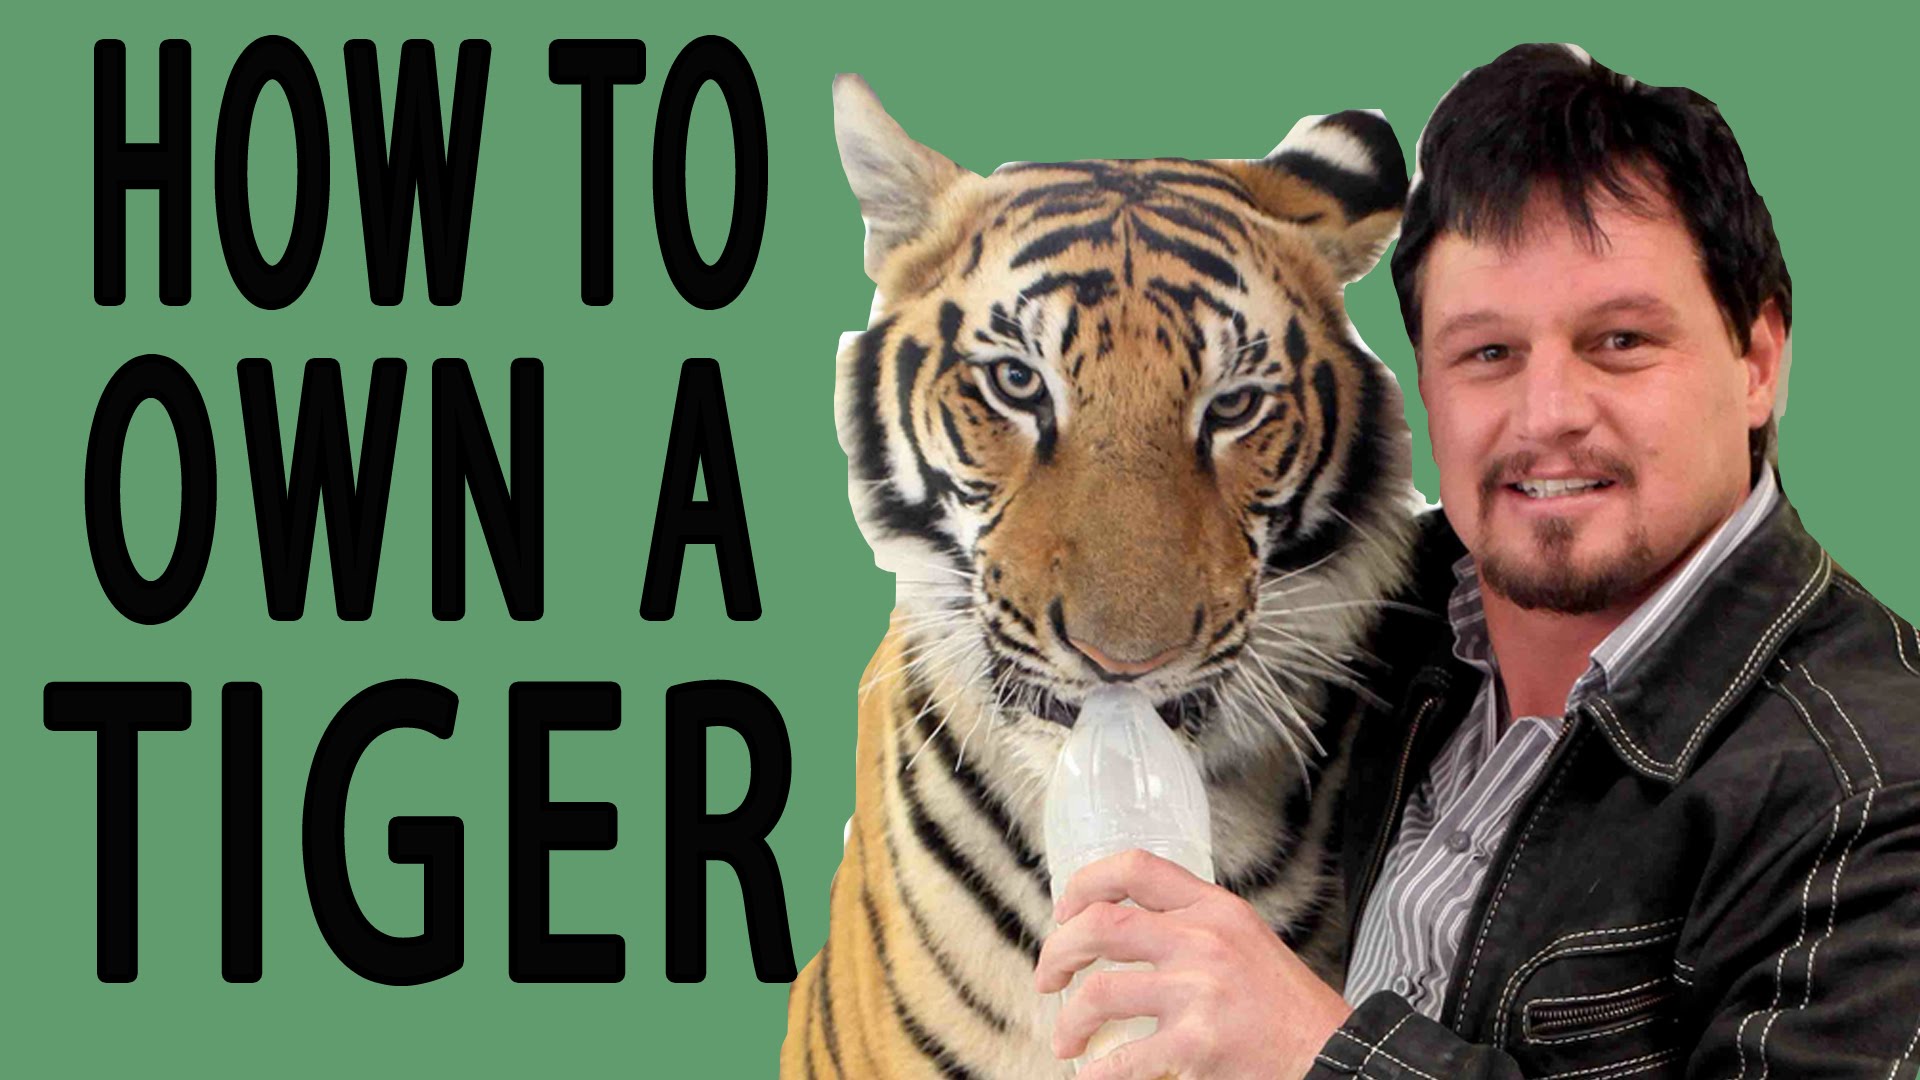 How to Own a Tiger - EPIC HOW TO - YouTube